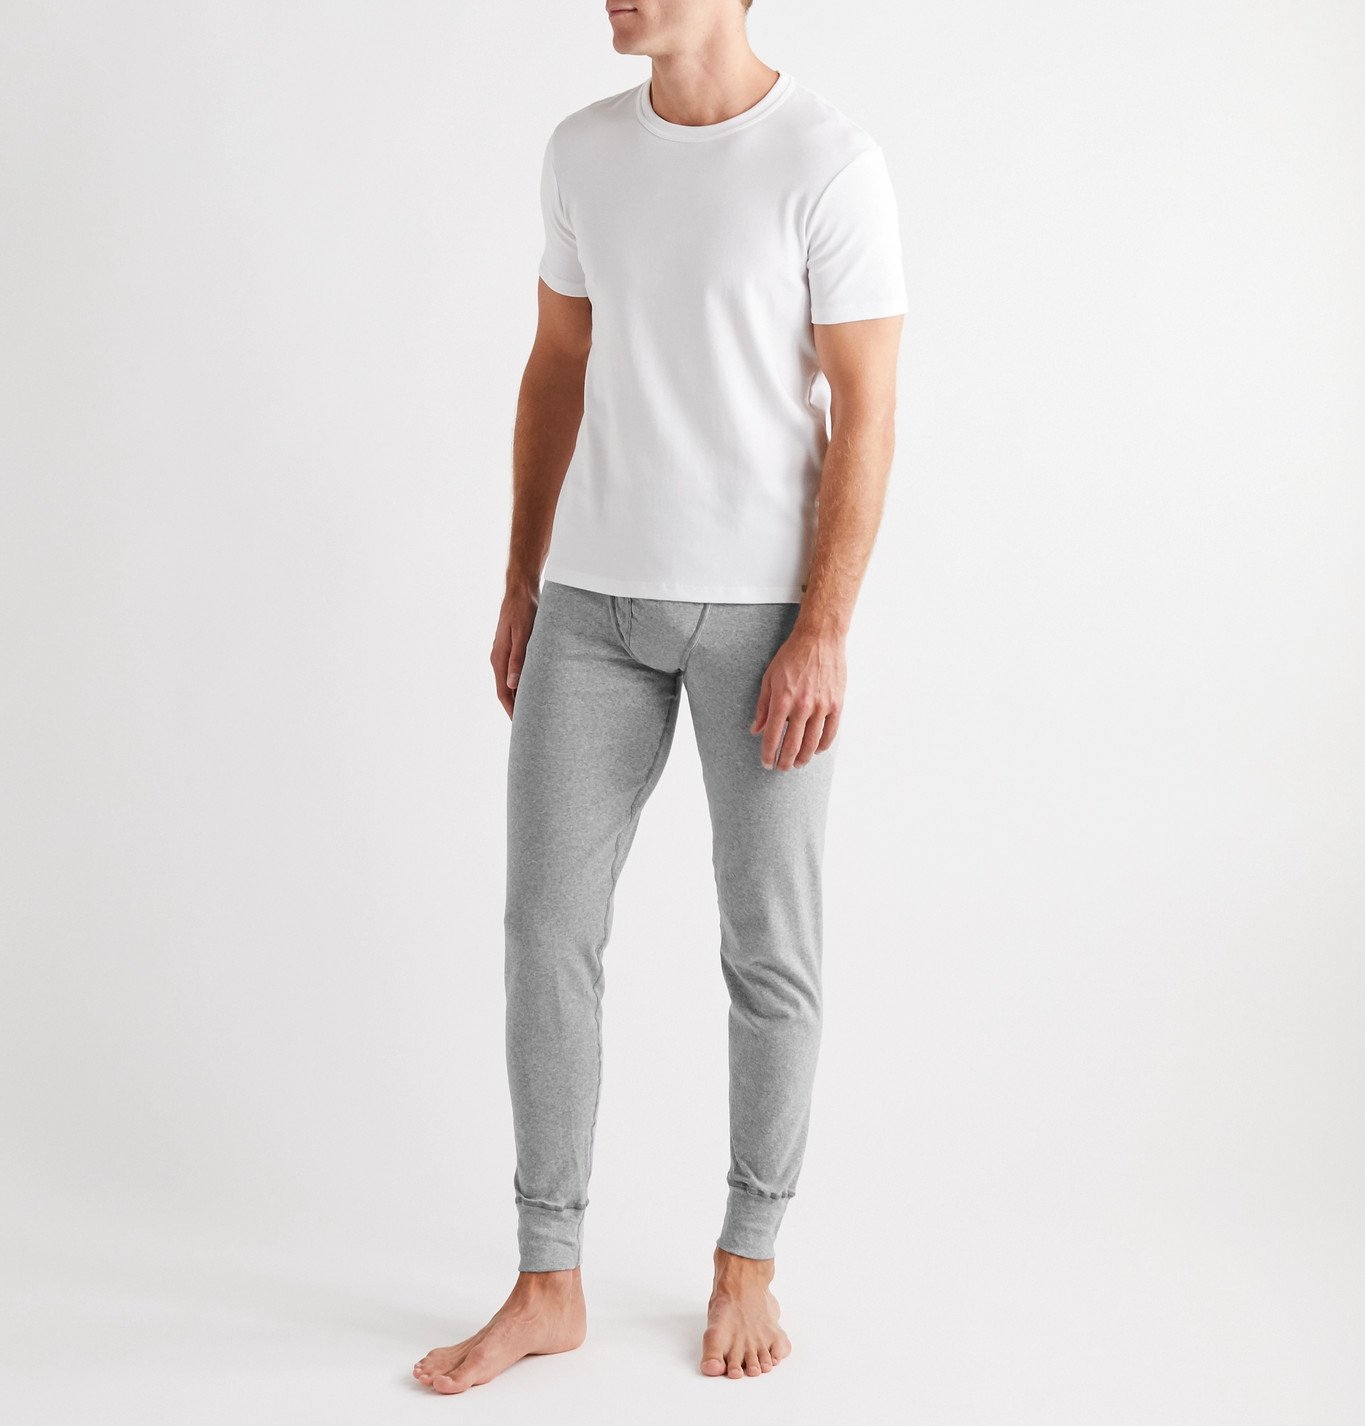 TOM FORD - Slim-Fit Mélange Stretch-Cotton Jersey Long Johns - Gray TOM FORD